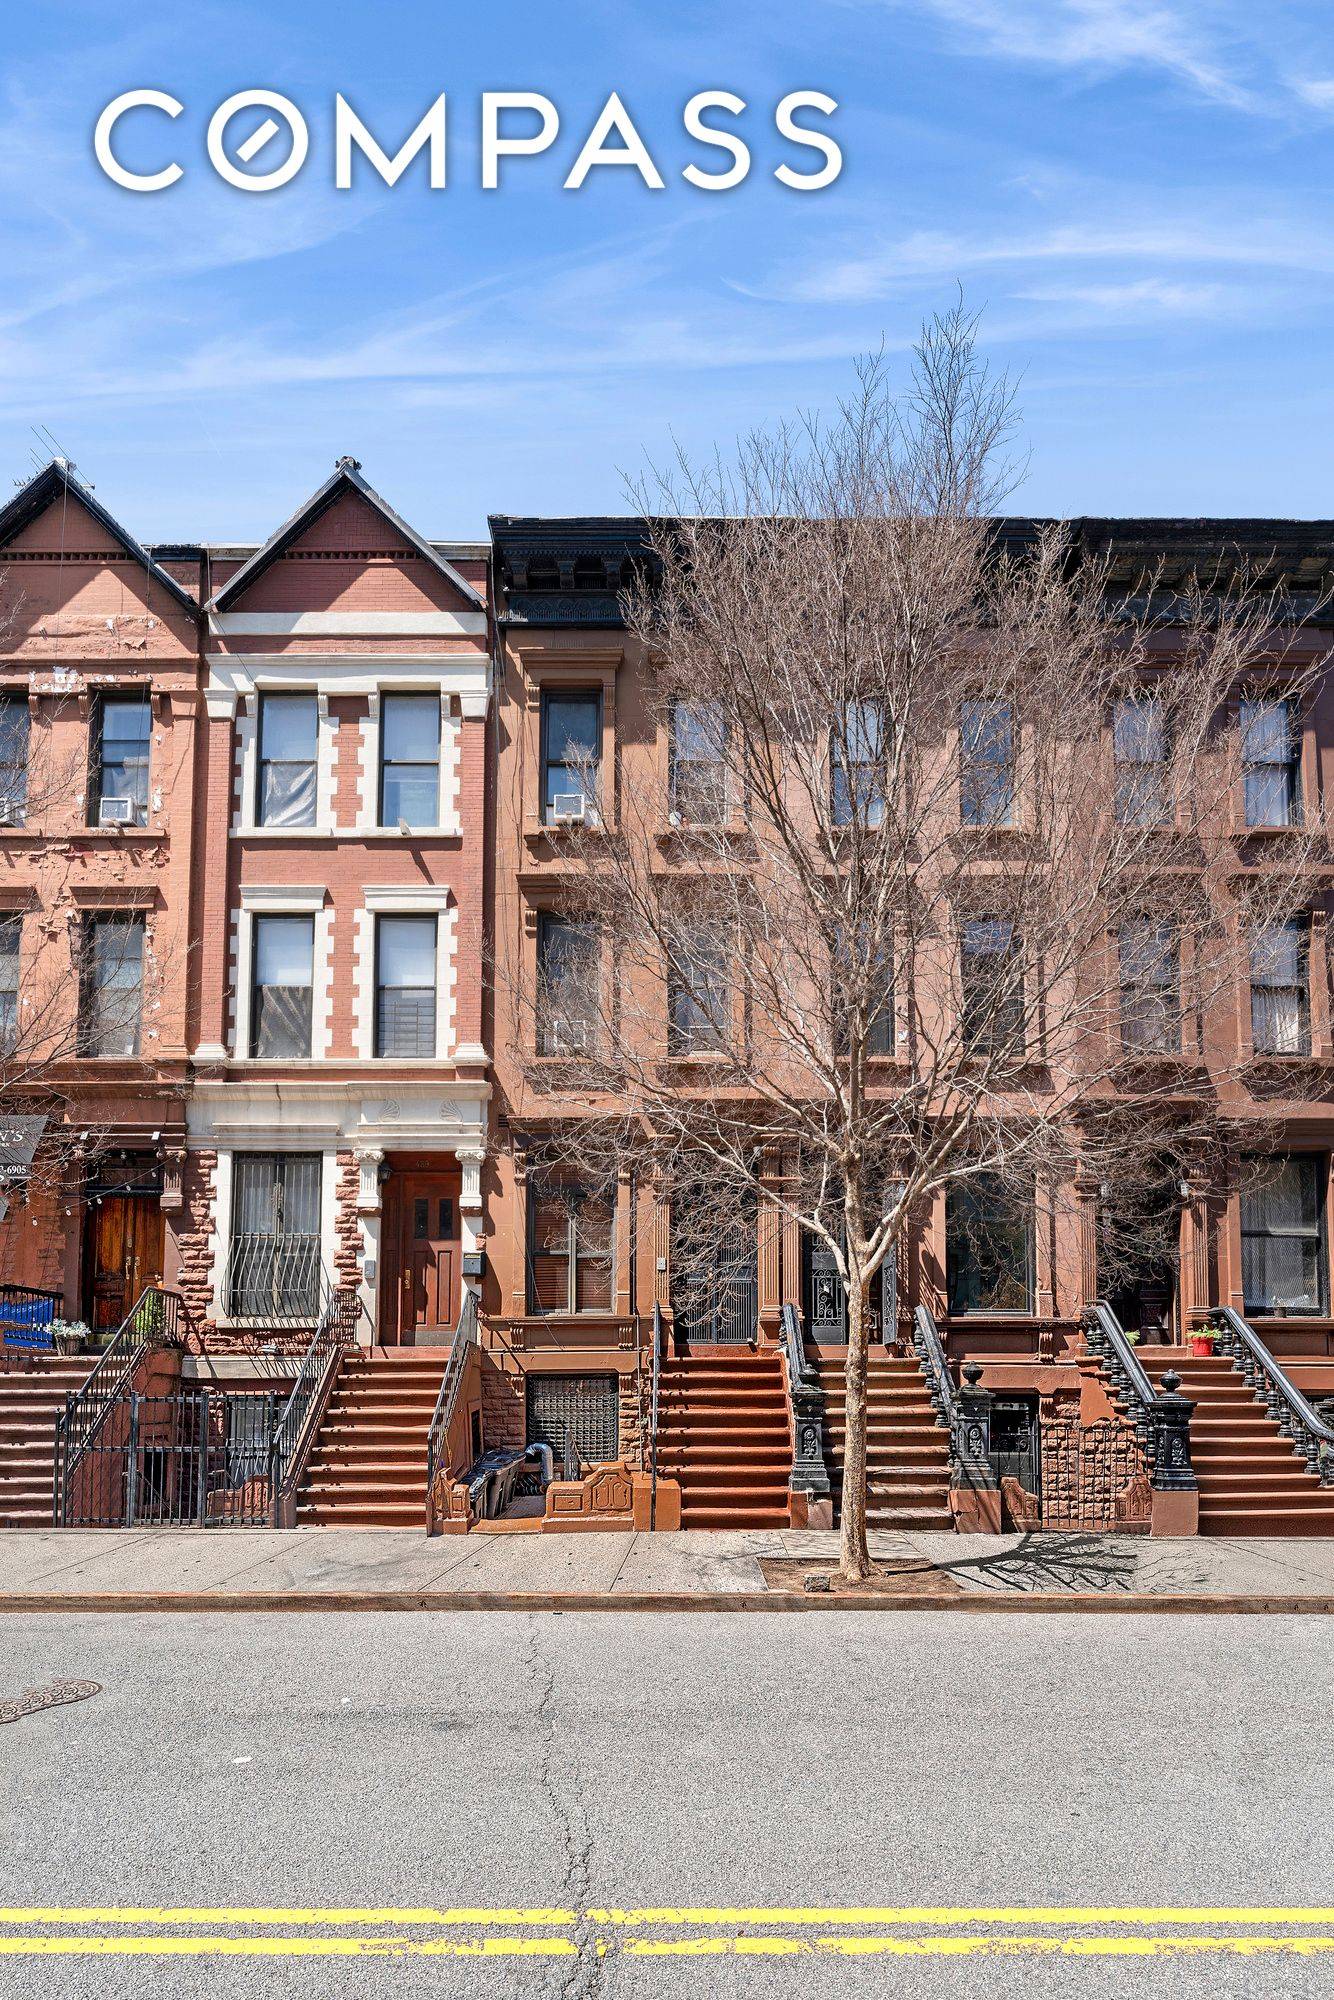 491 Manhattan Avenue is a 3 story apartment building located on a tree lined street in South Harlem.